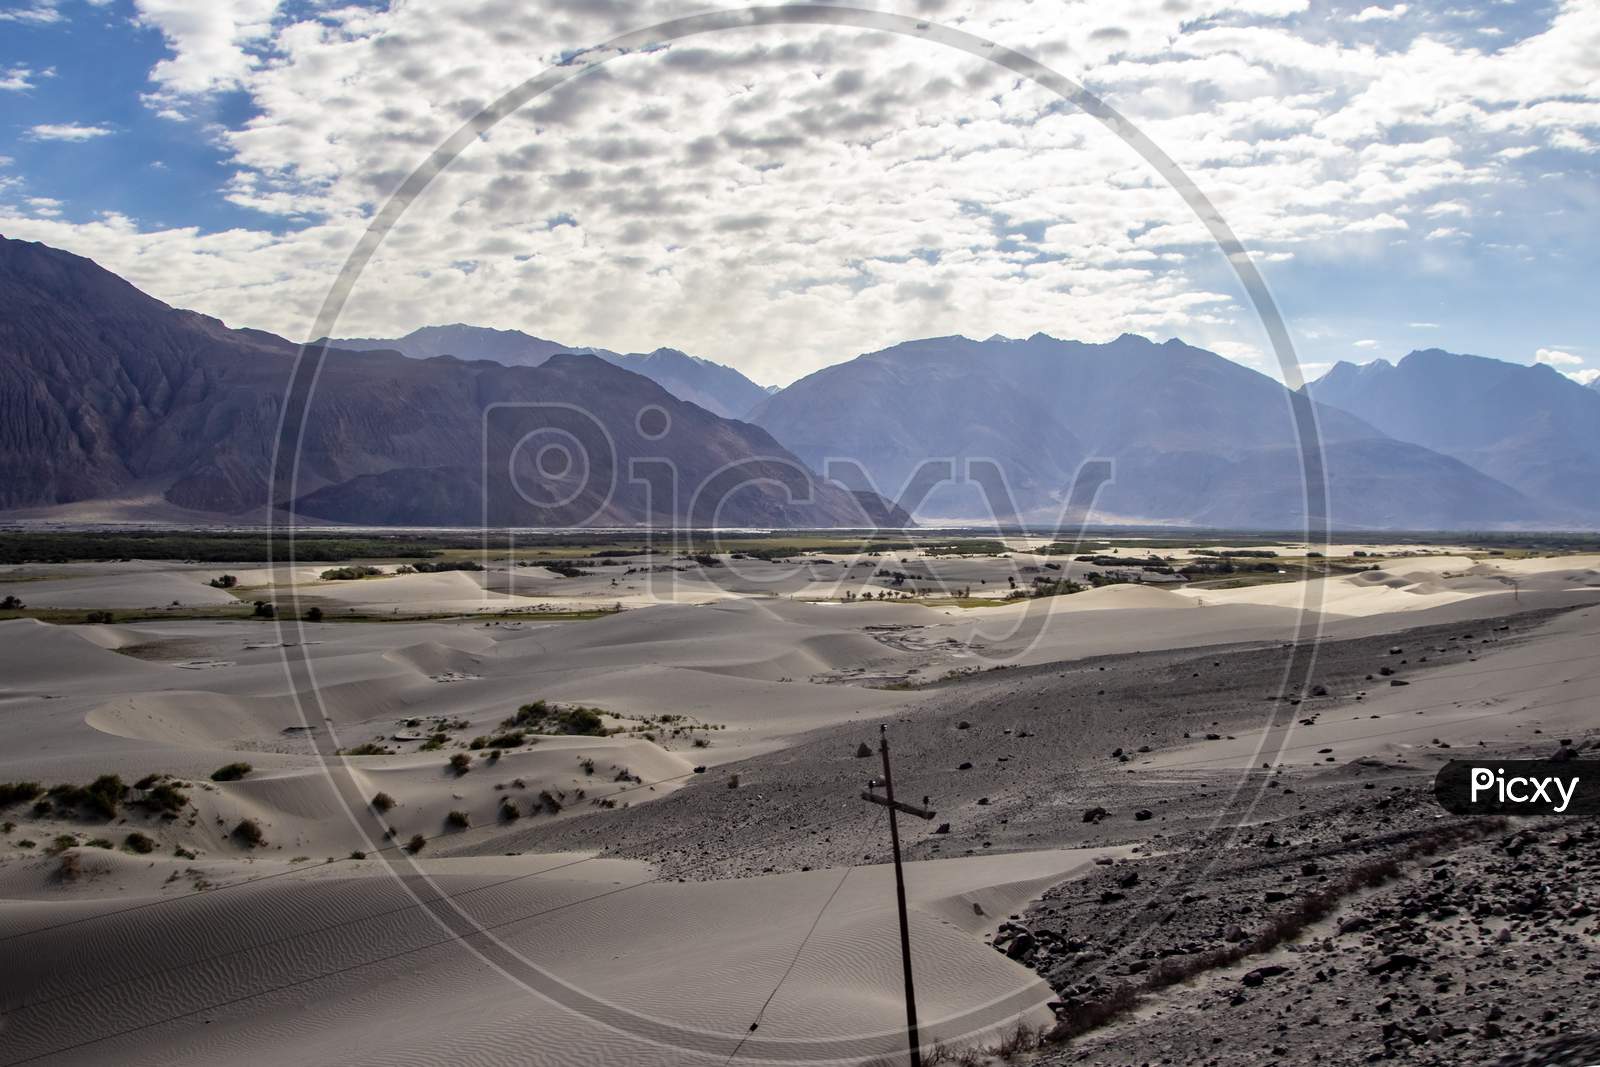 Arid Dry Dessert Sand Dunes Of Nubra Valley With Himalayan Barren Mountain Range In The Background At Ladakh, Kashmir, India